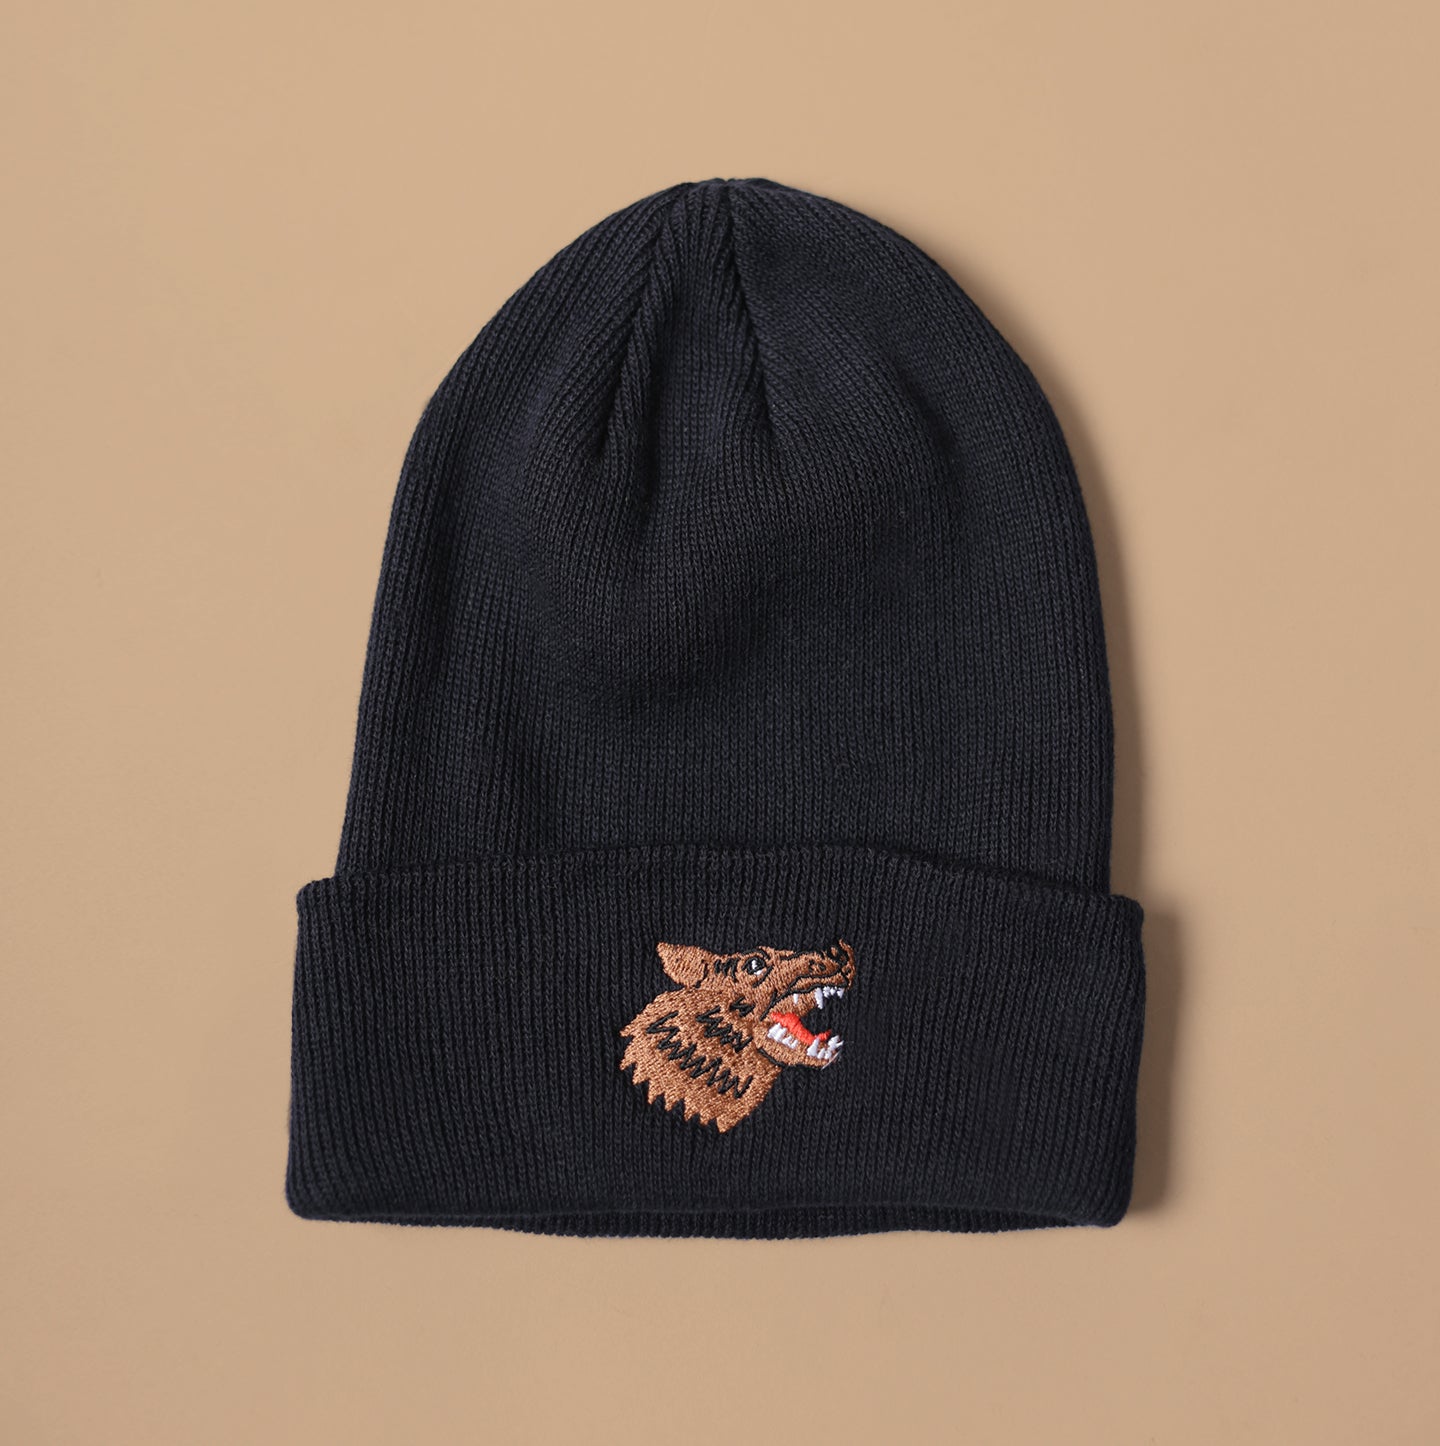 Cotton Knit Toque - Black Wolf Embroidery